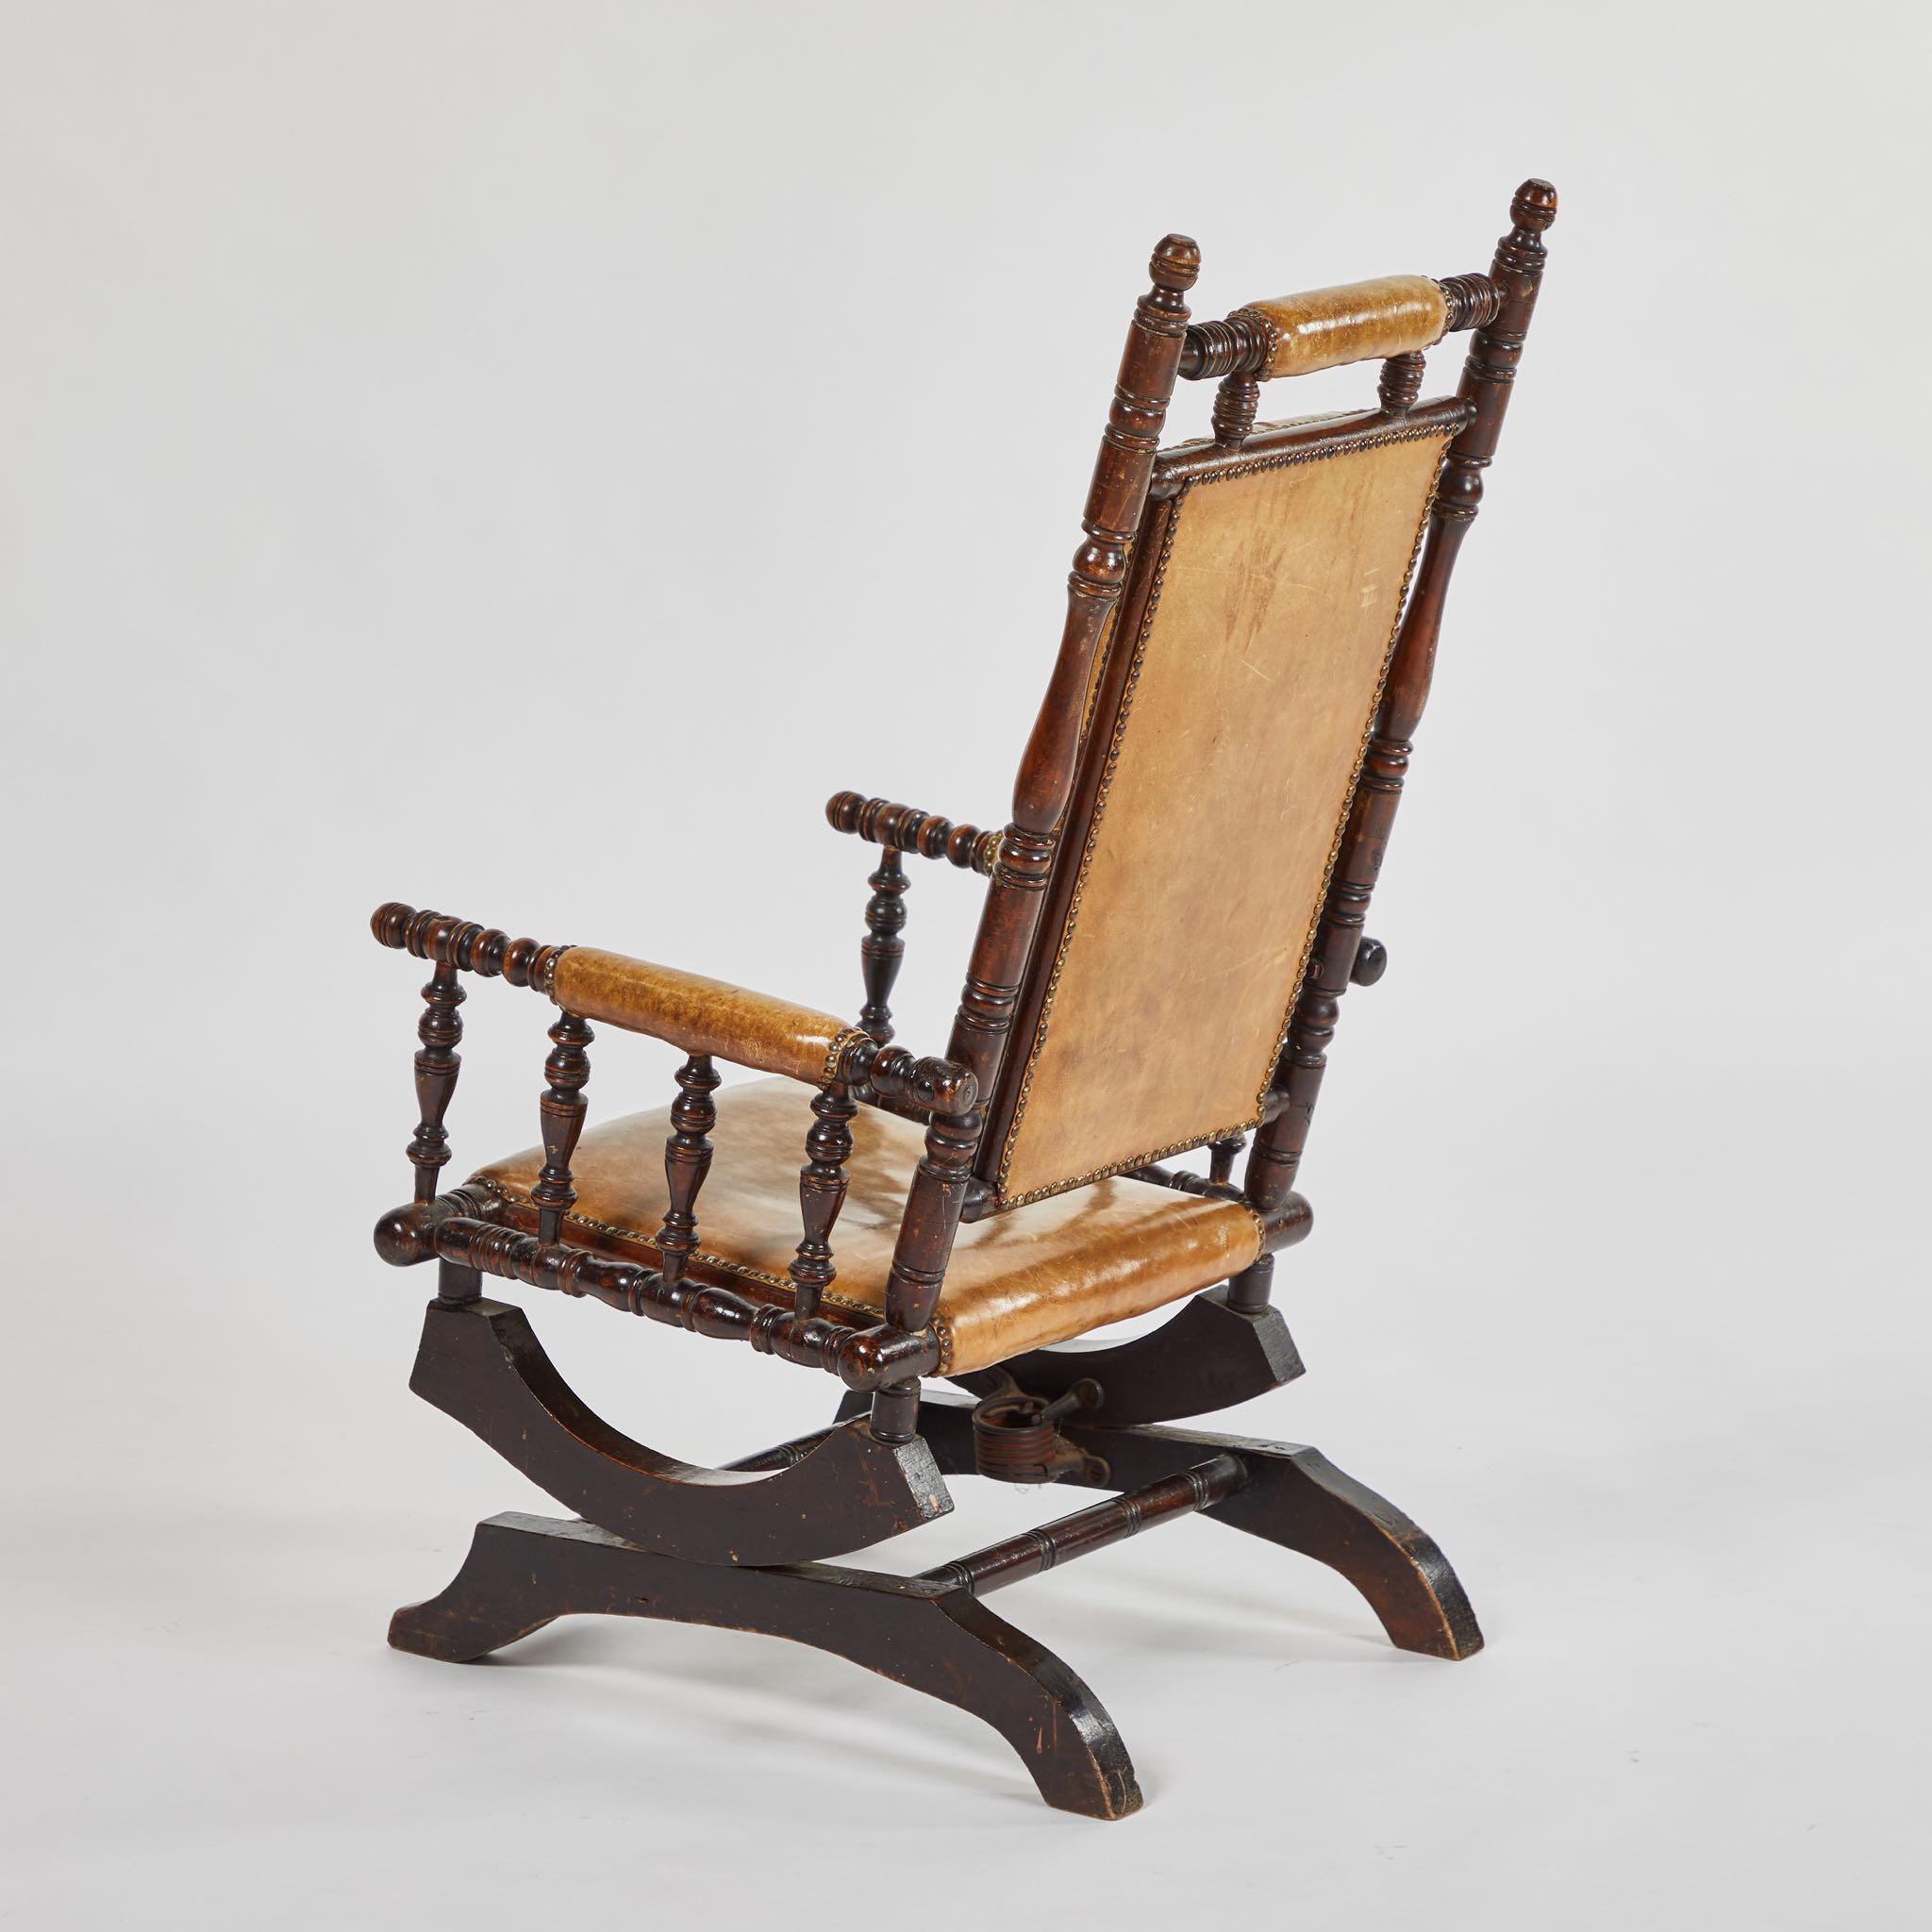 Victorian mahogany rocking chair with tufted honey-toned leather upholstery. Mounted on a platform base and with fabulous turned wood detailing, the design has a cozy, Neo-Gothic feel. 

England, circa 1880

Dimensions: 21W x 25.5D x 41.5H